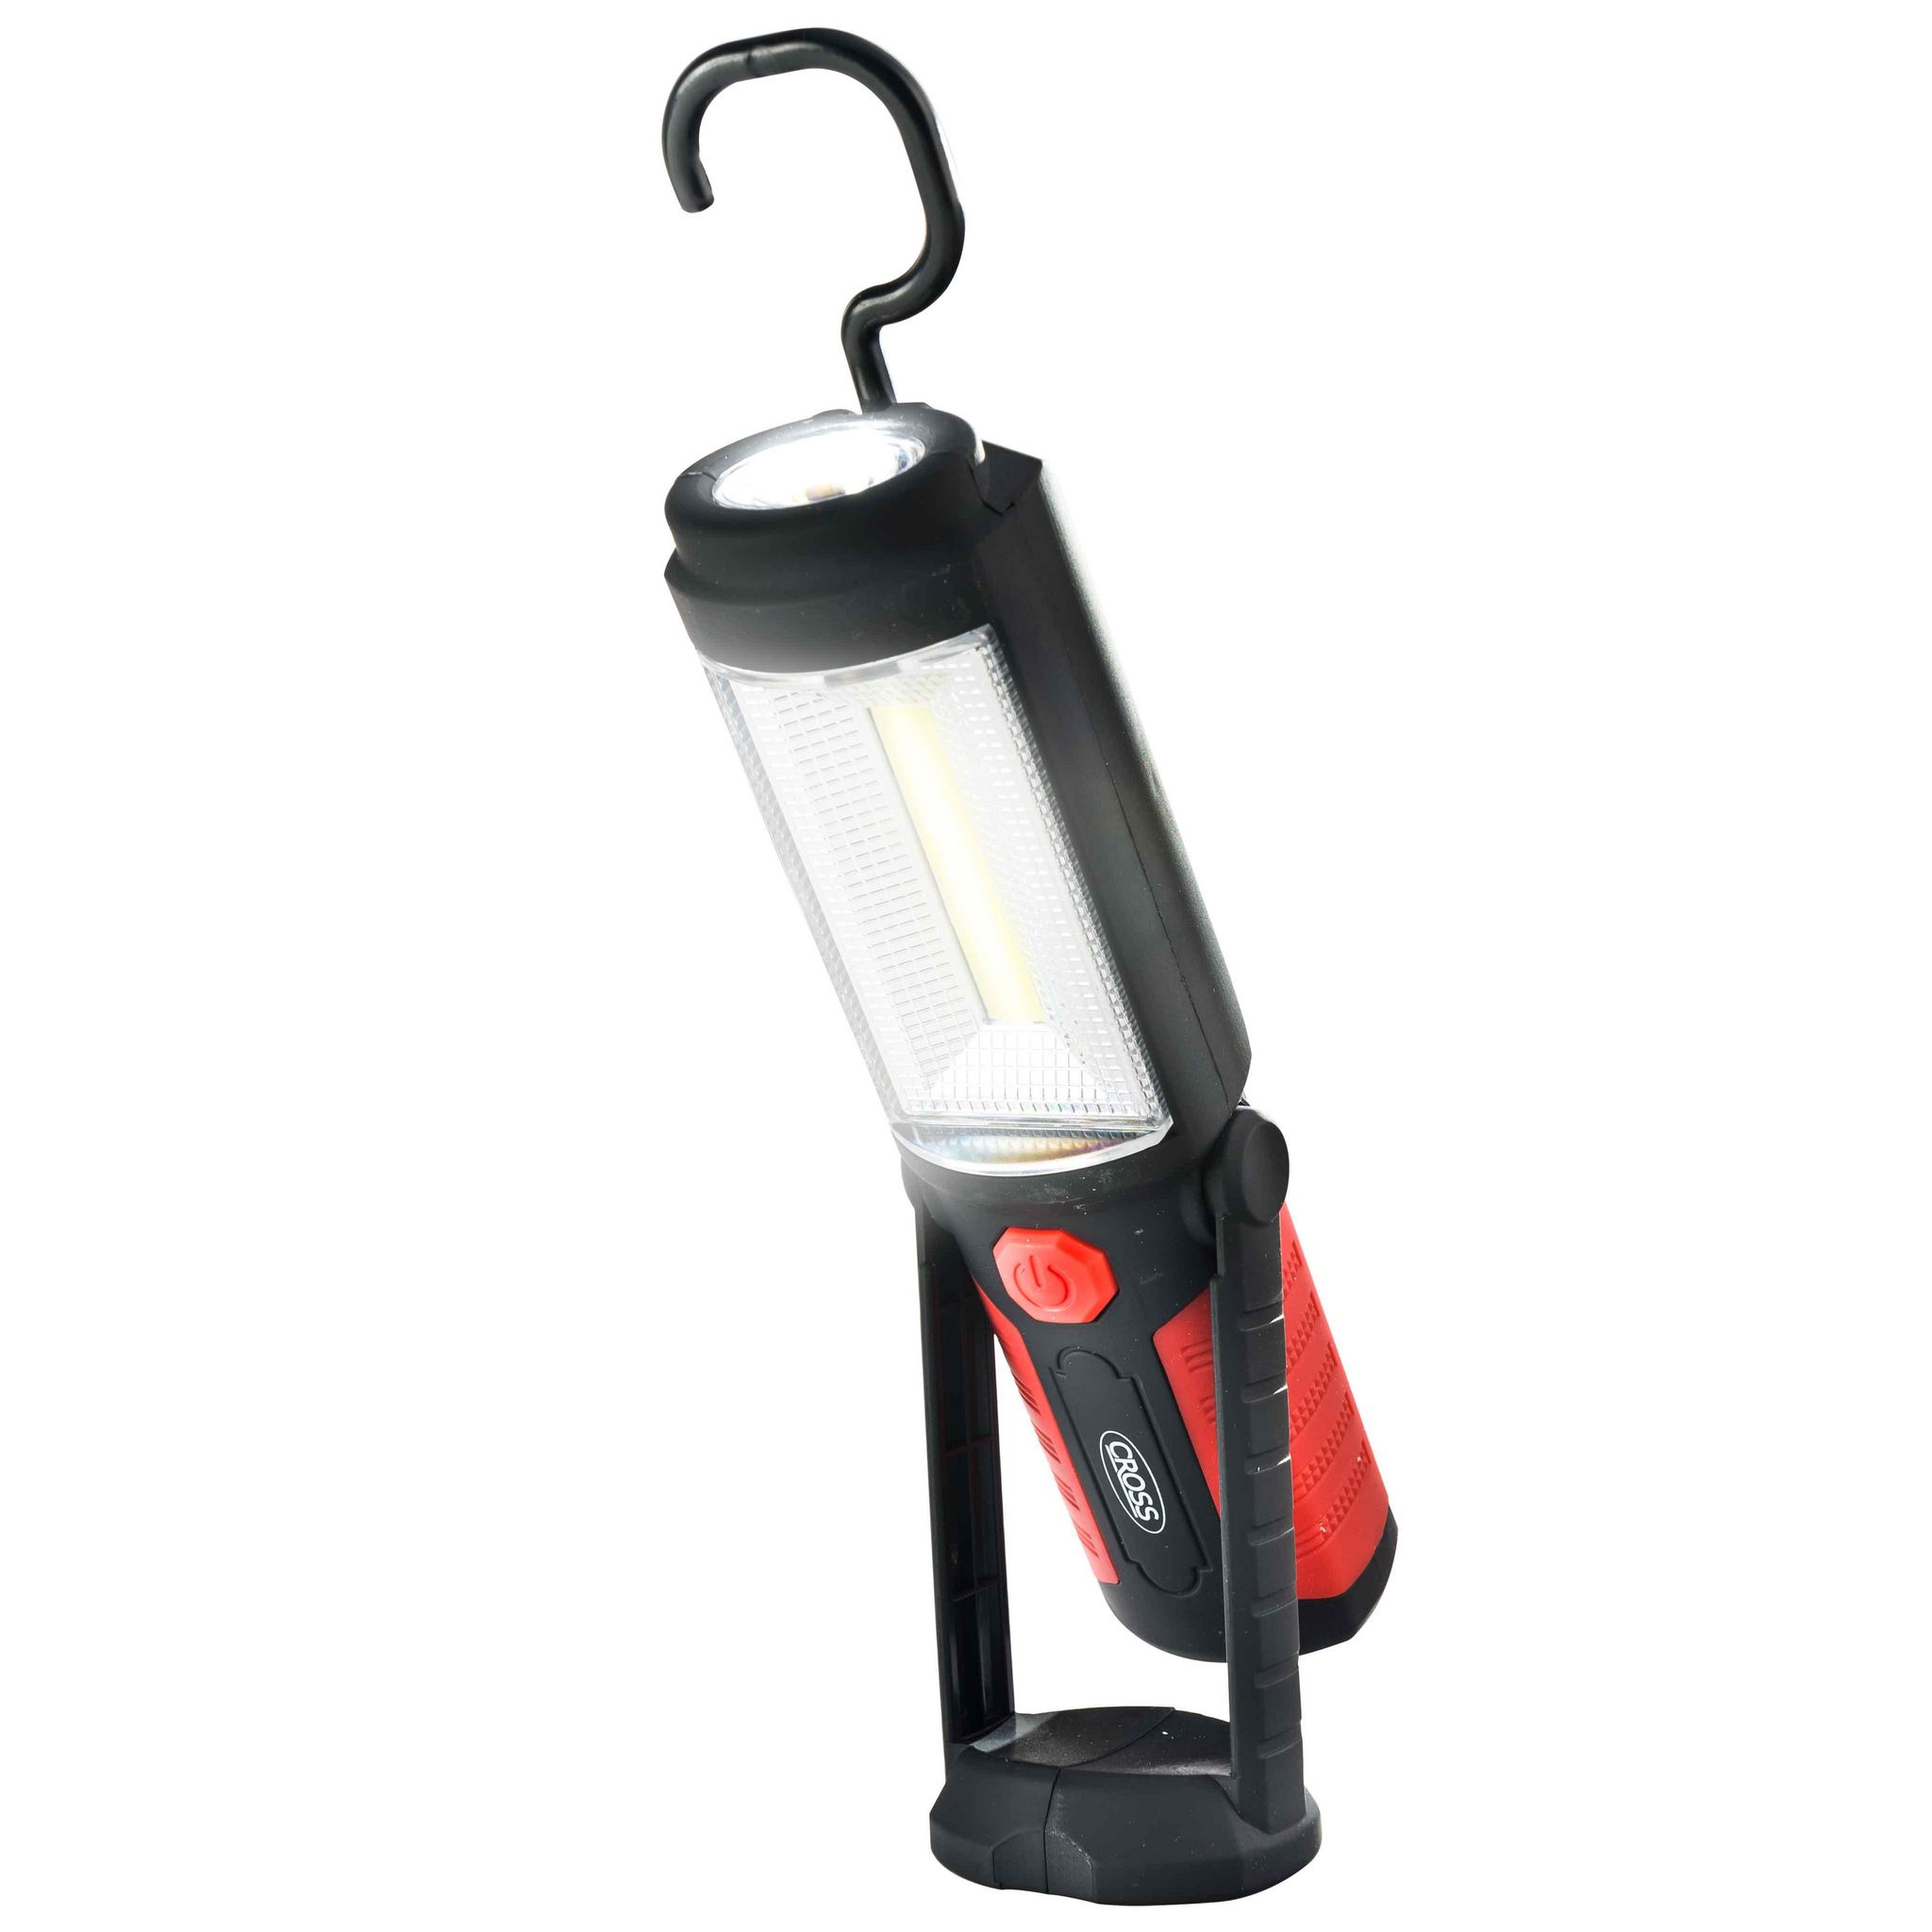 Lampe solaire de camping 18 led - Provence Outillage